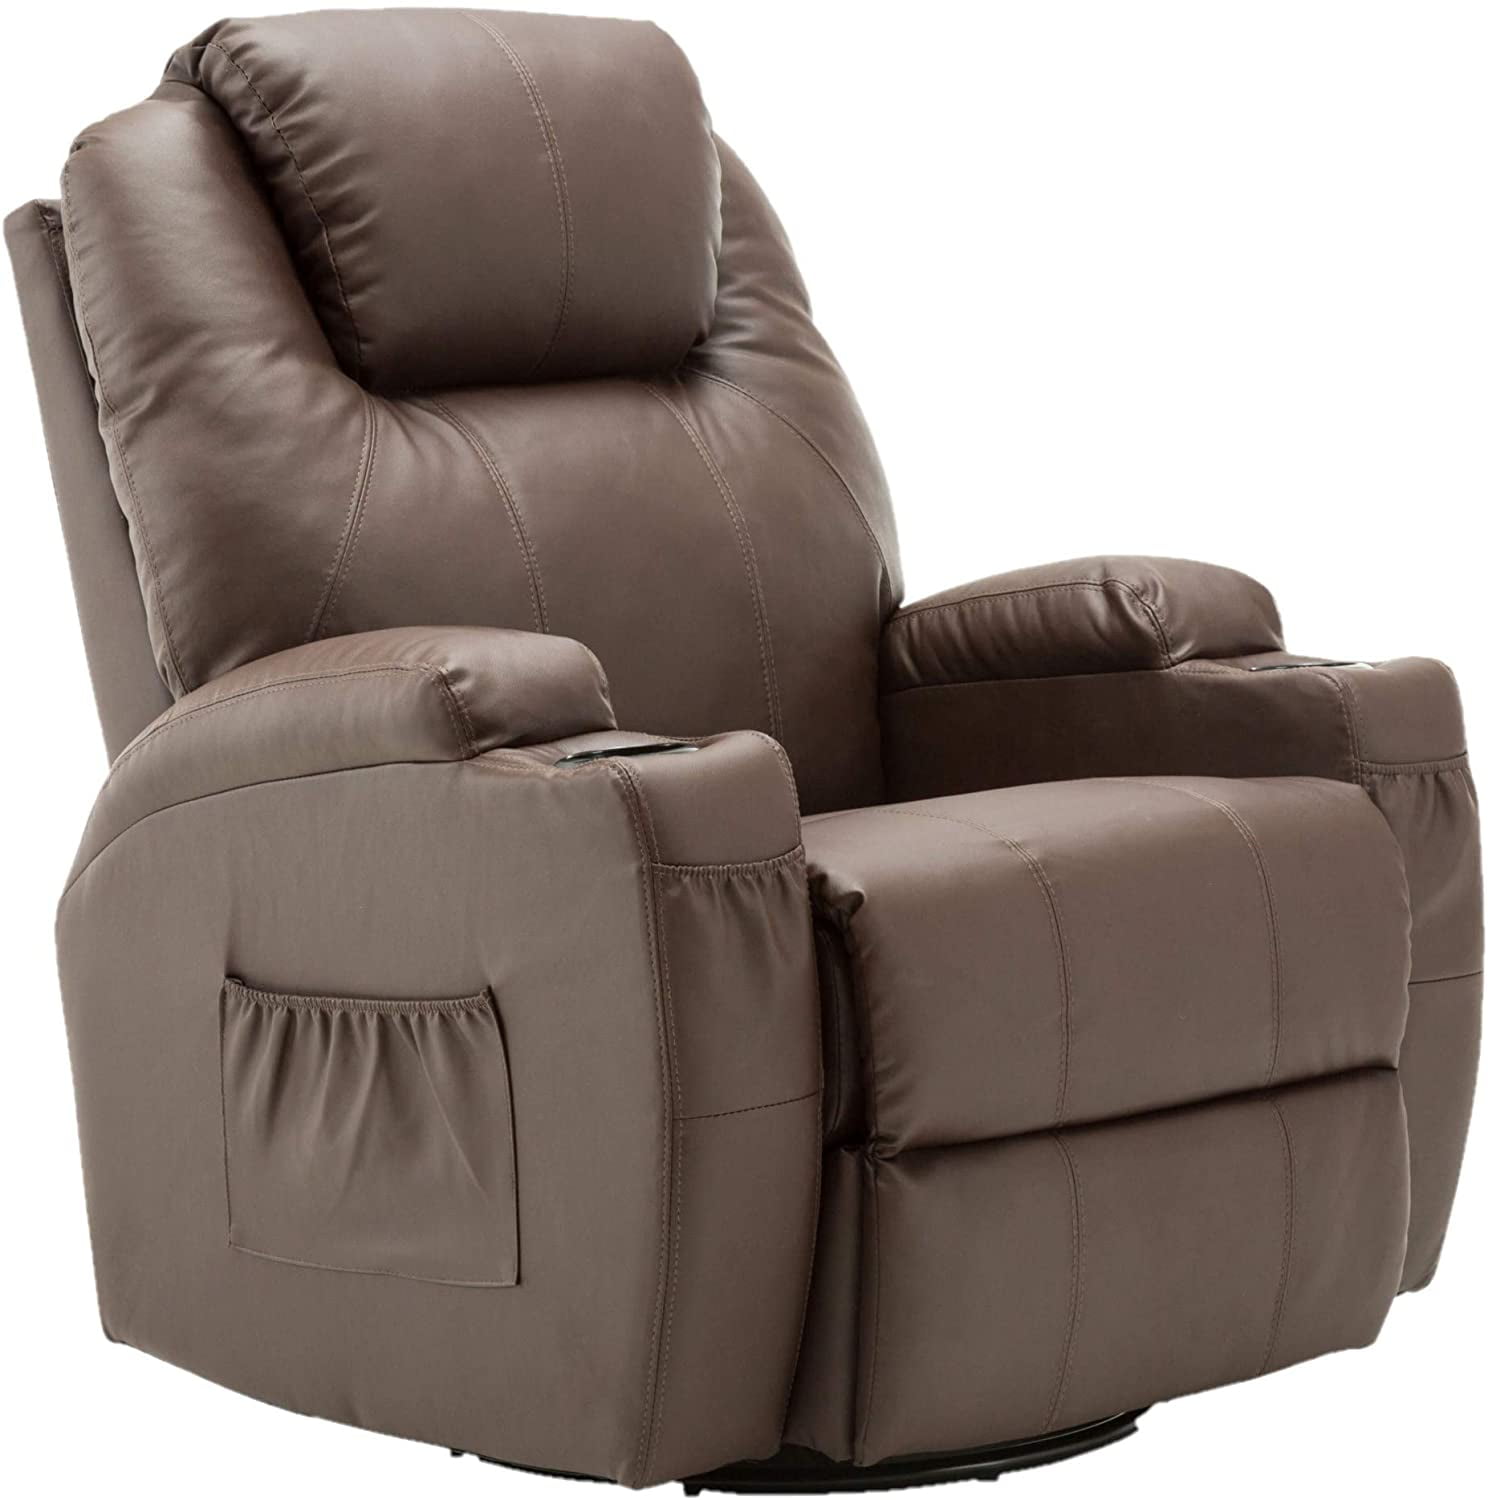 Mcombo Faux Leather Recliner Brown, Leather Rocker Recliner Chairs